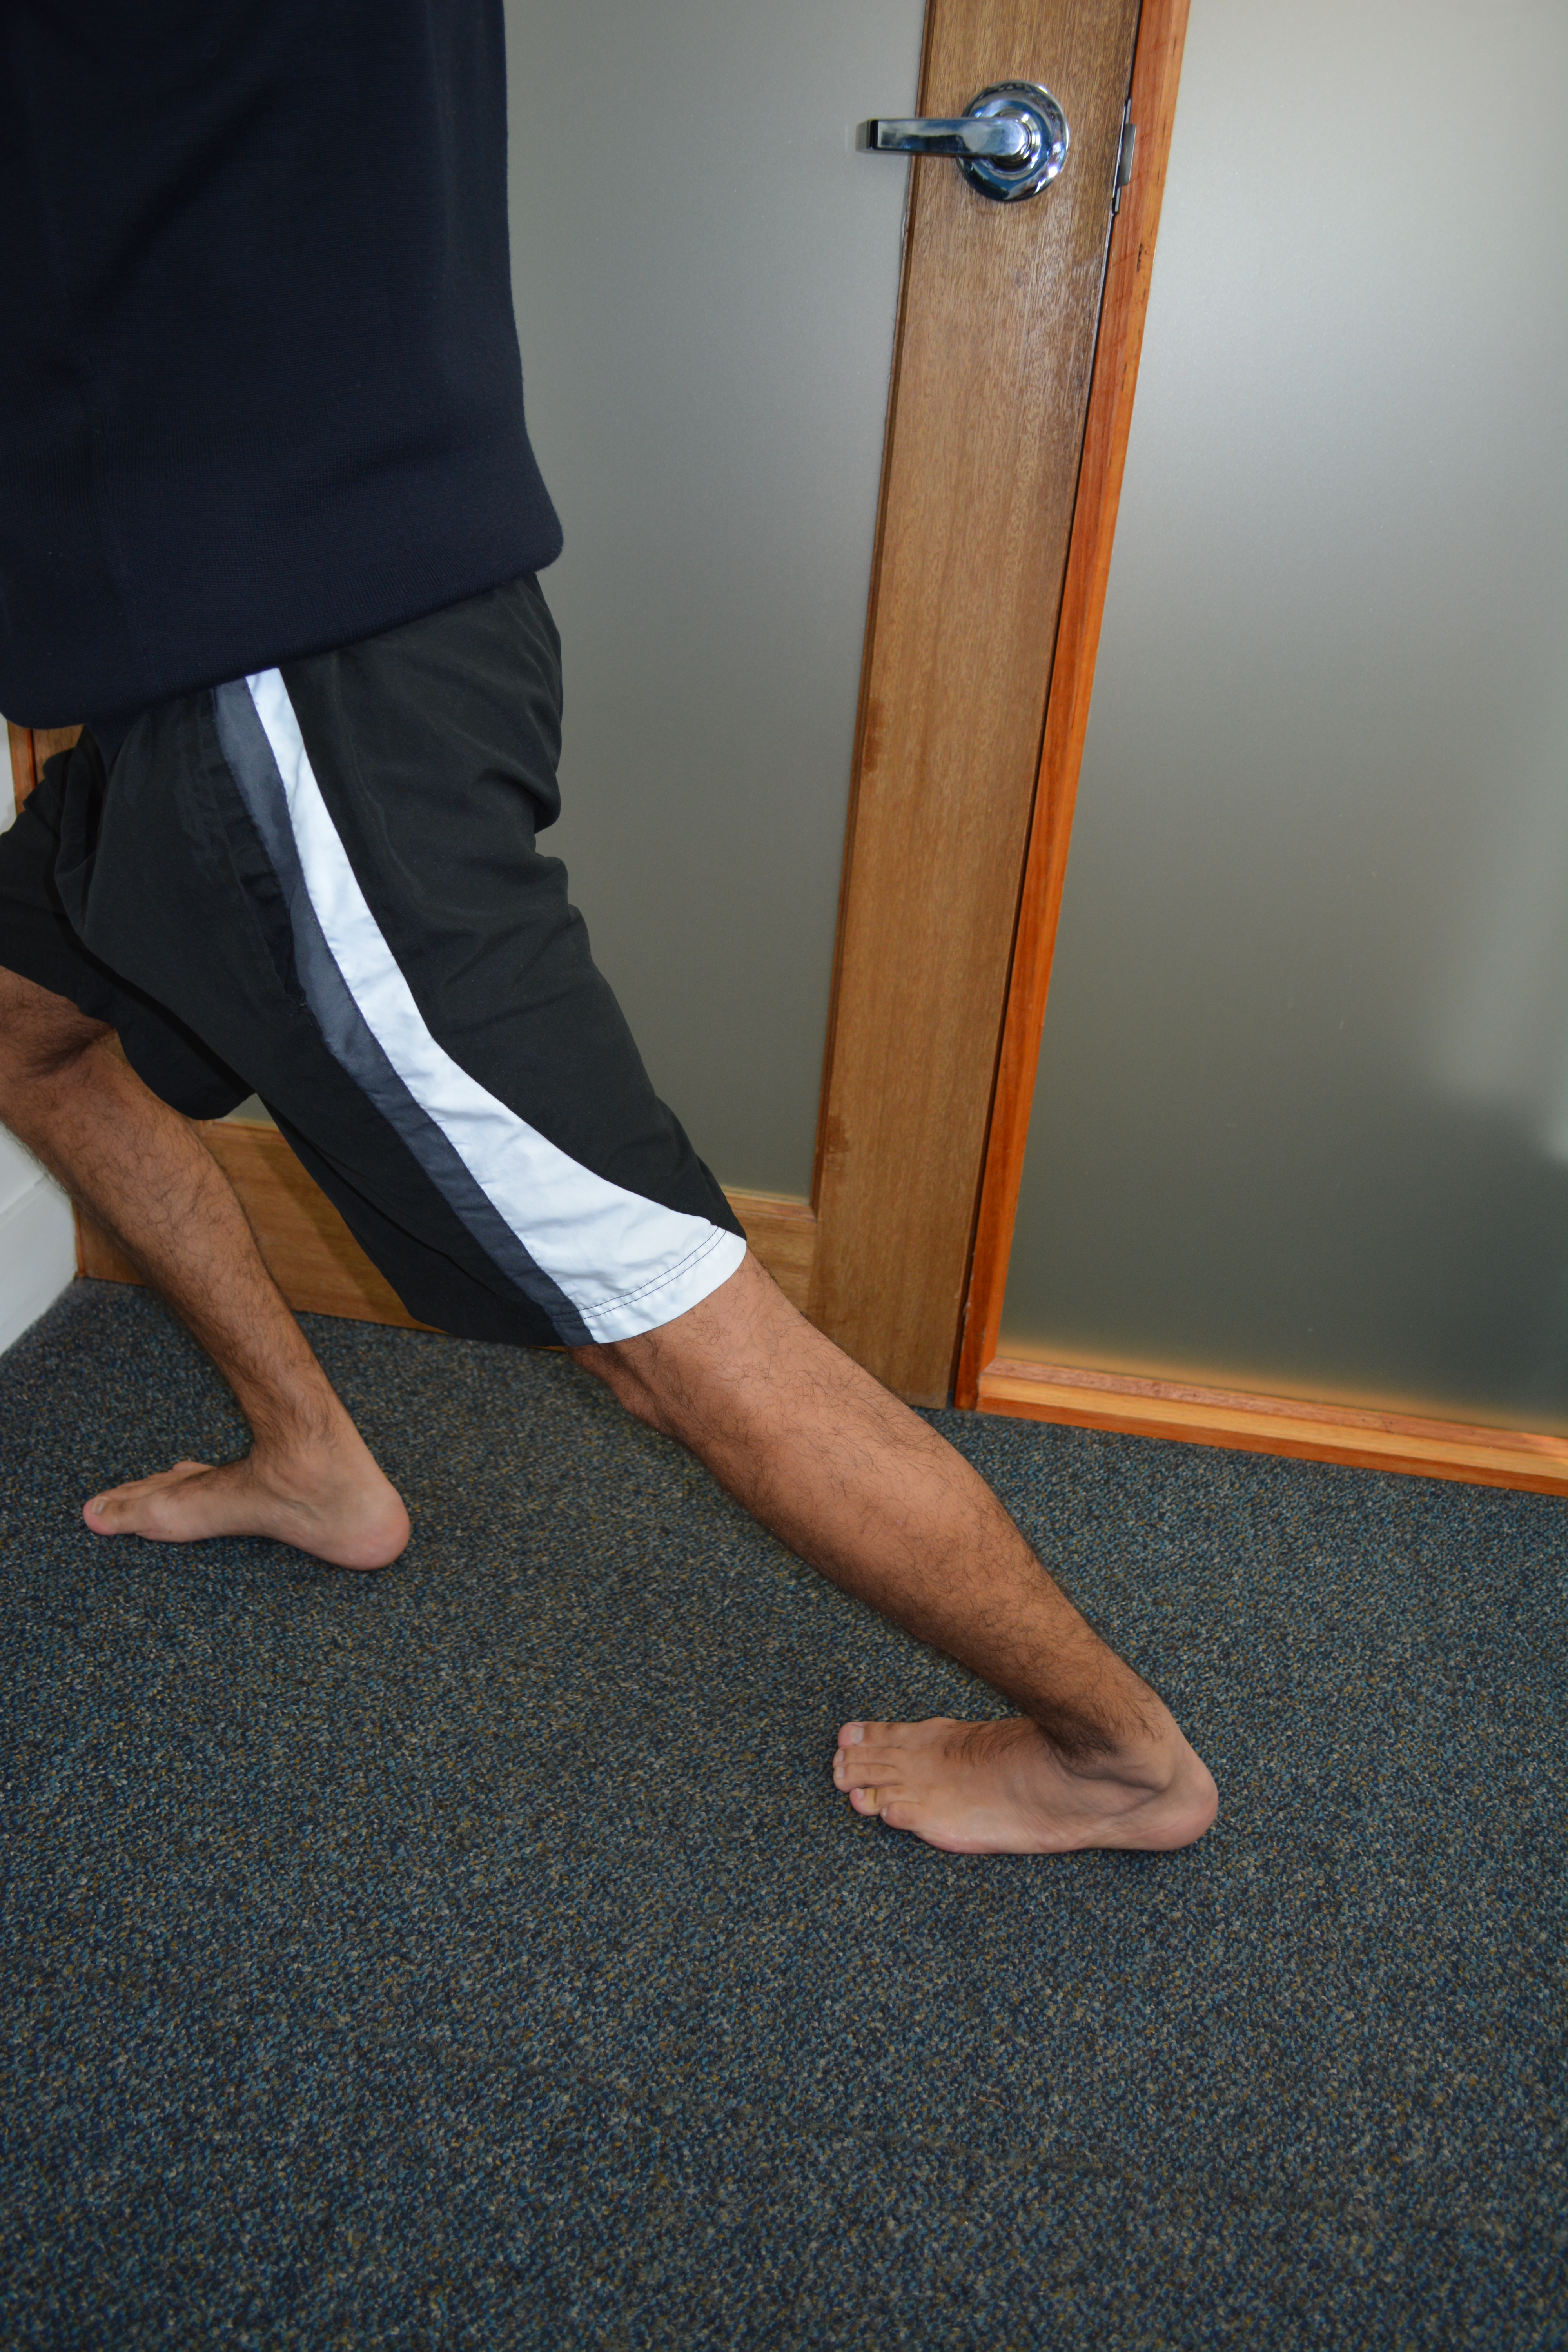 What is Plantar Fasciitis? - Brisbane Physiotherapy